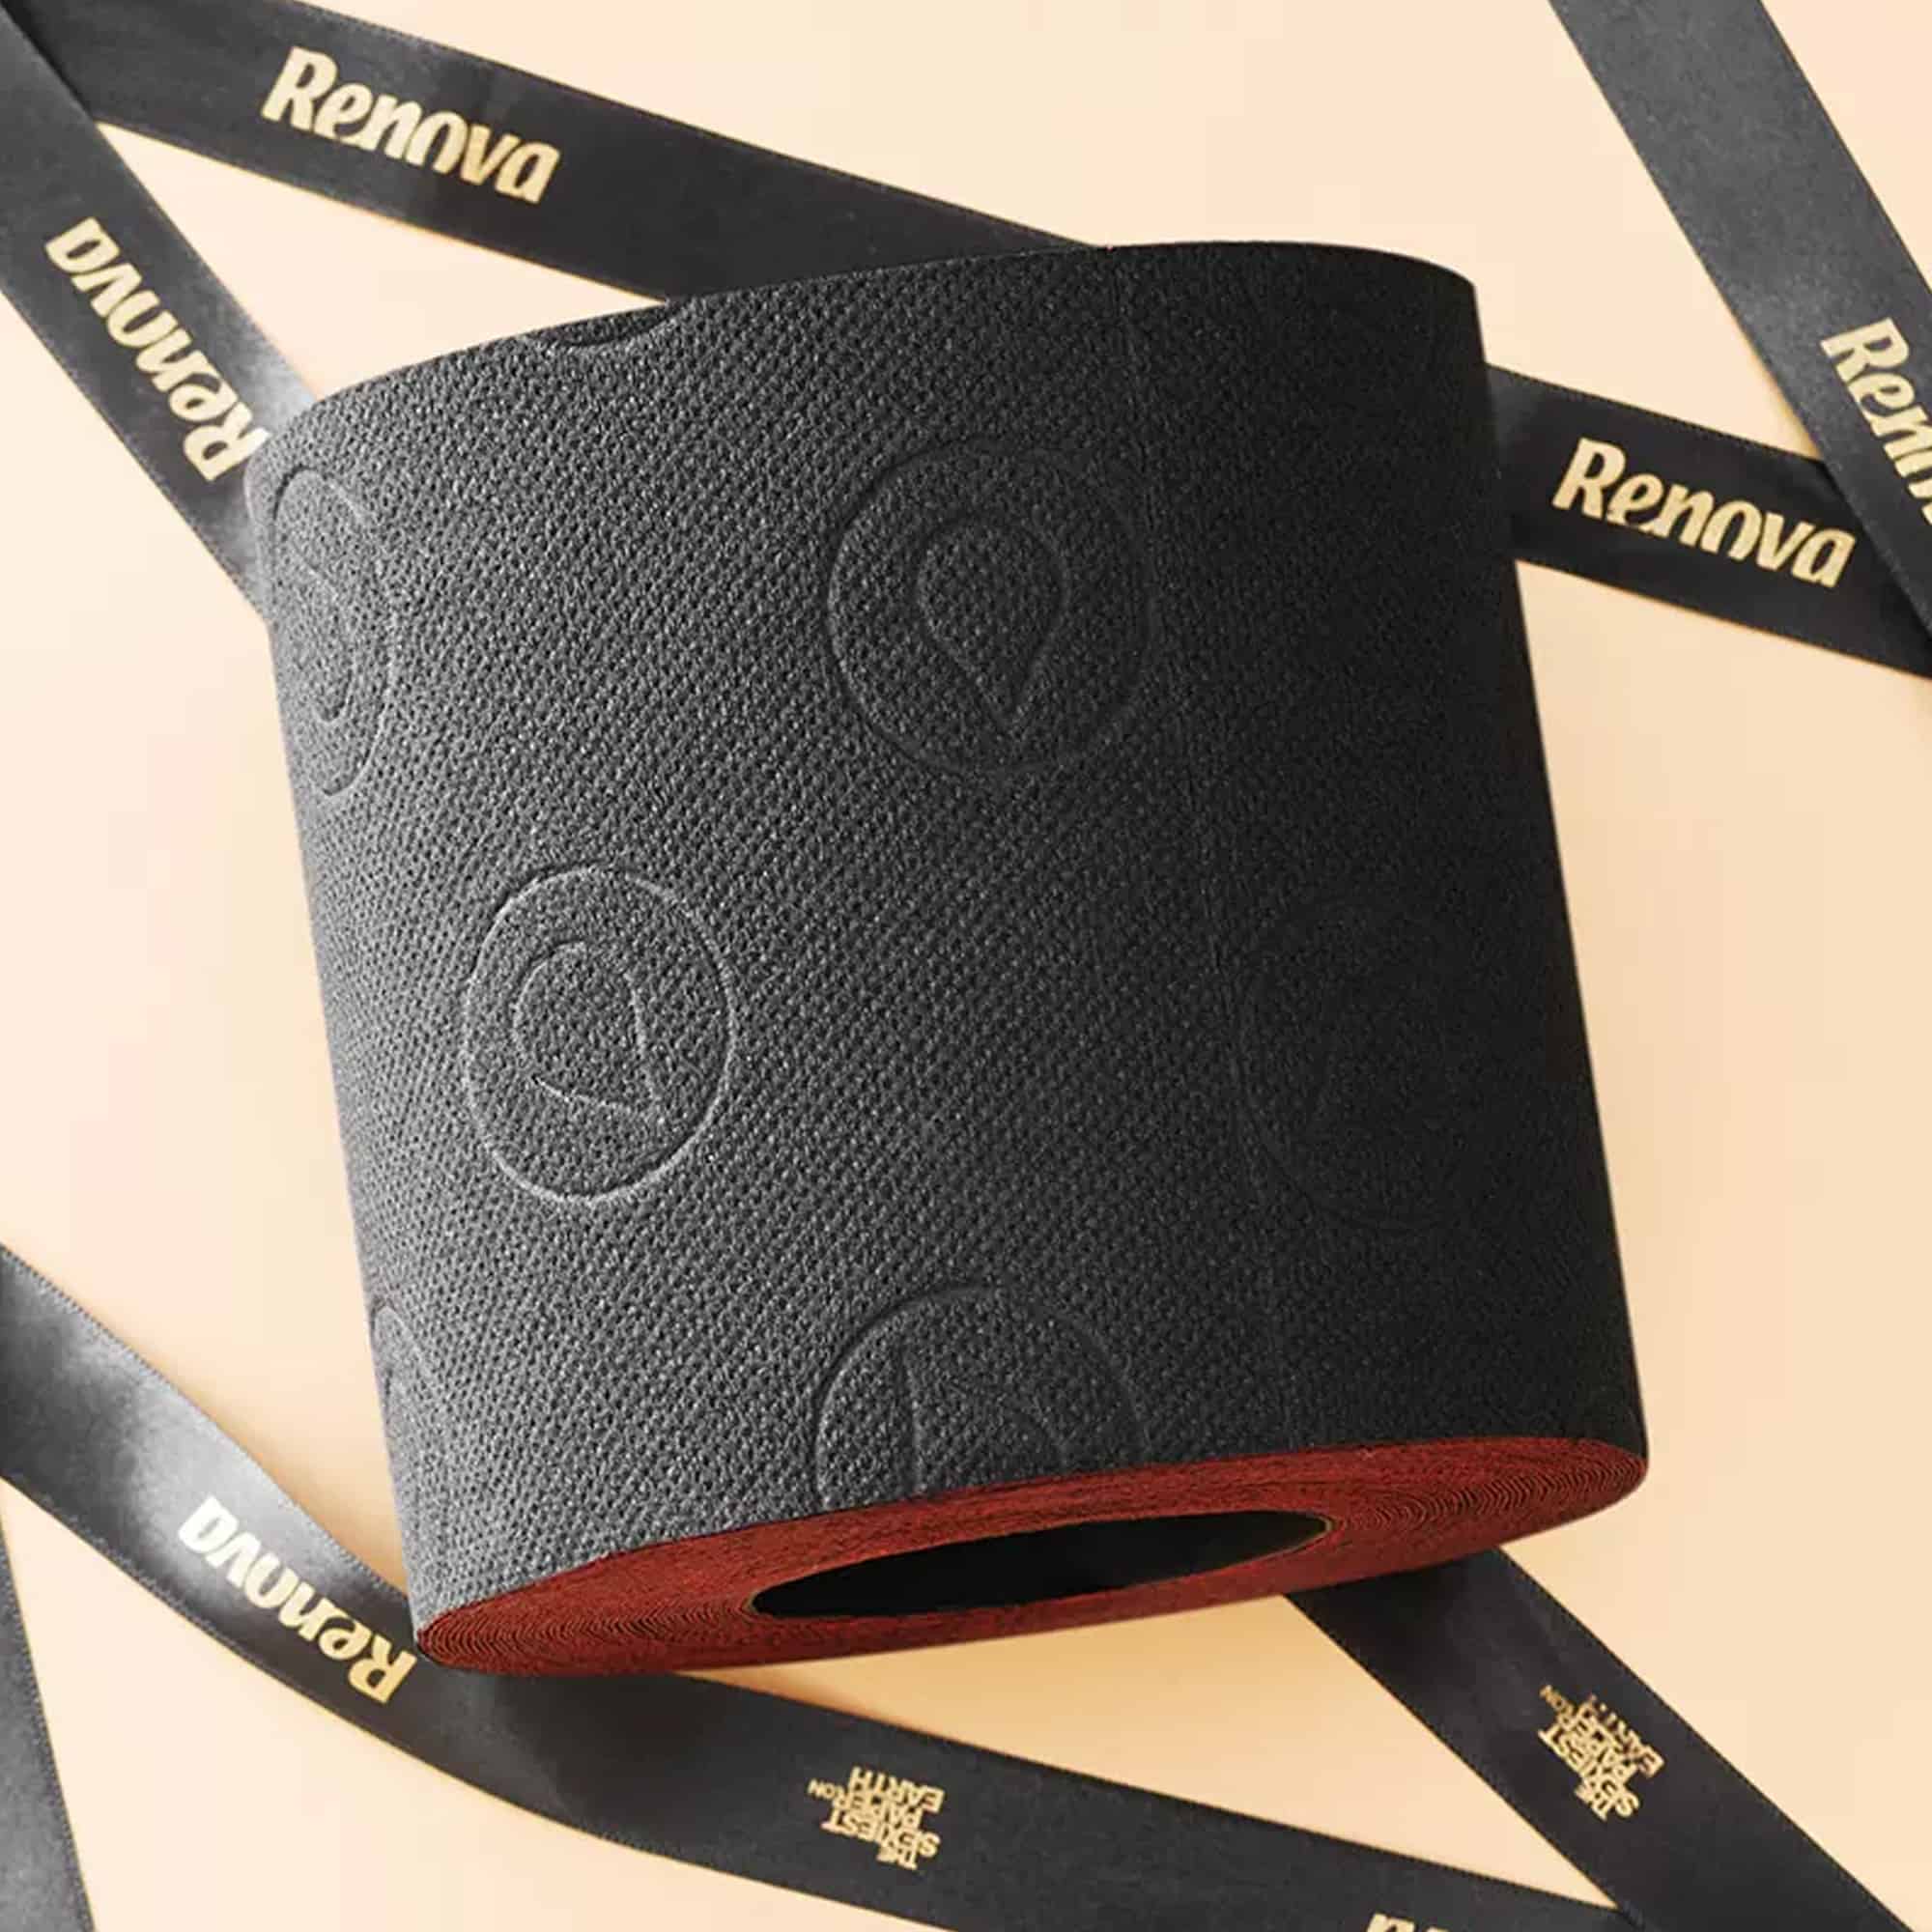 https://roll-lux.com/wp-content/uploads/2022/05/RO200096194-Gift-Box-Toilet-Paper-4-Ply-Black-Red-1-Roll-Luxury-Limited-Edition-2.jpg